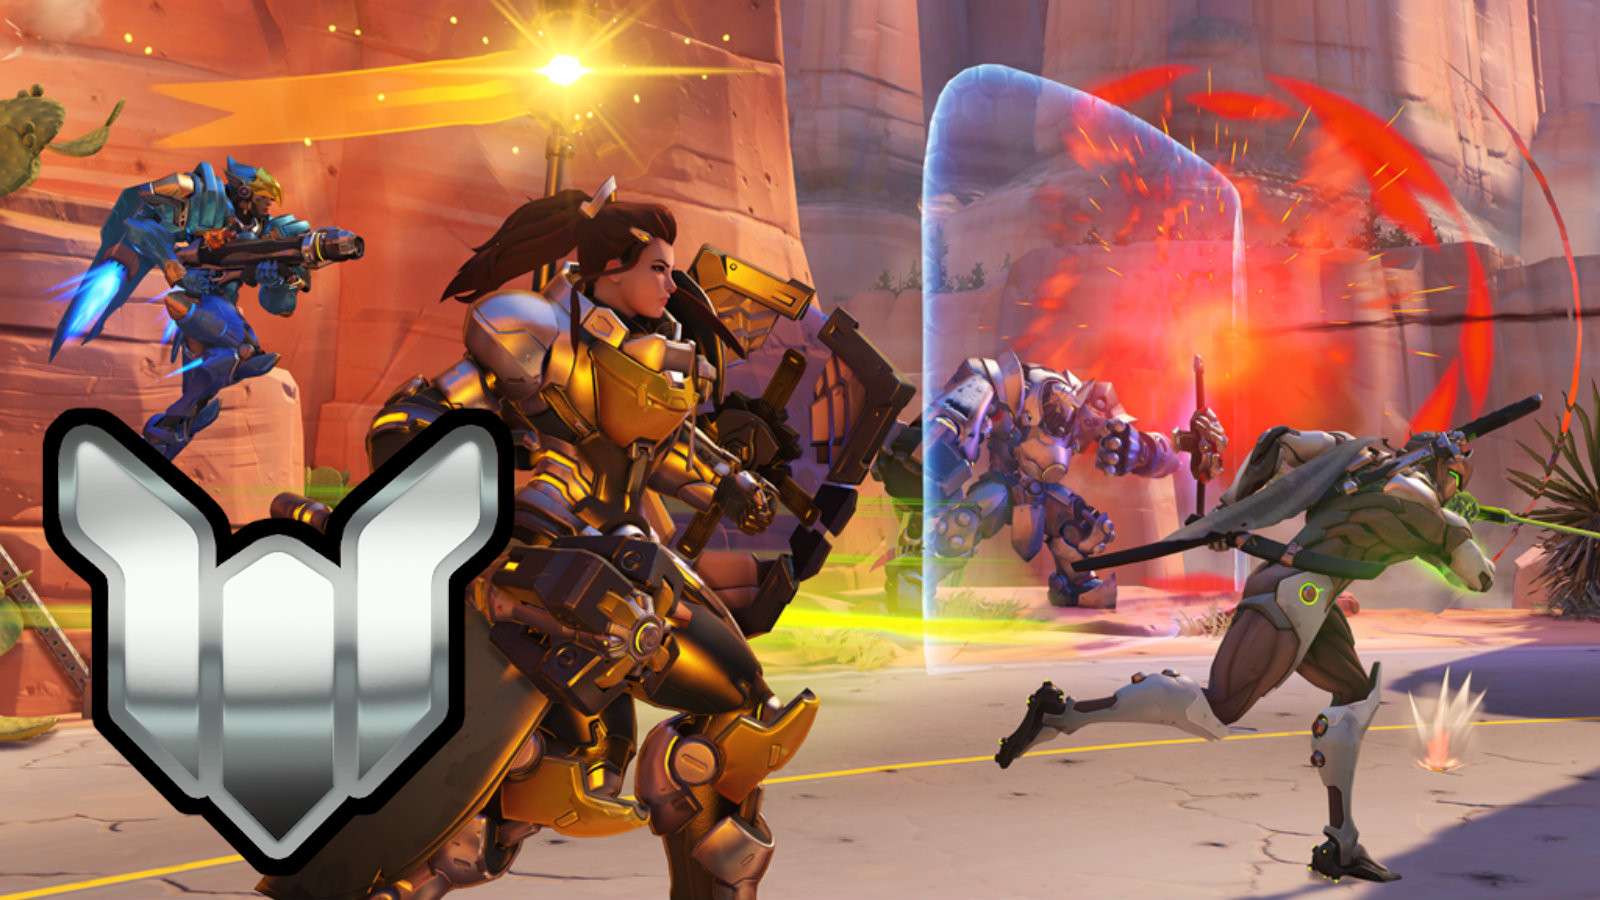 Overwatch's Brigitte running towards enemy on Route 66 with Pharah and Genji